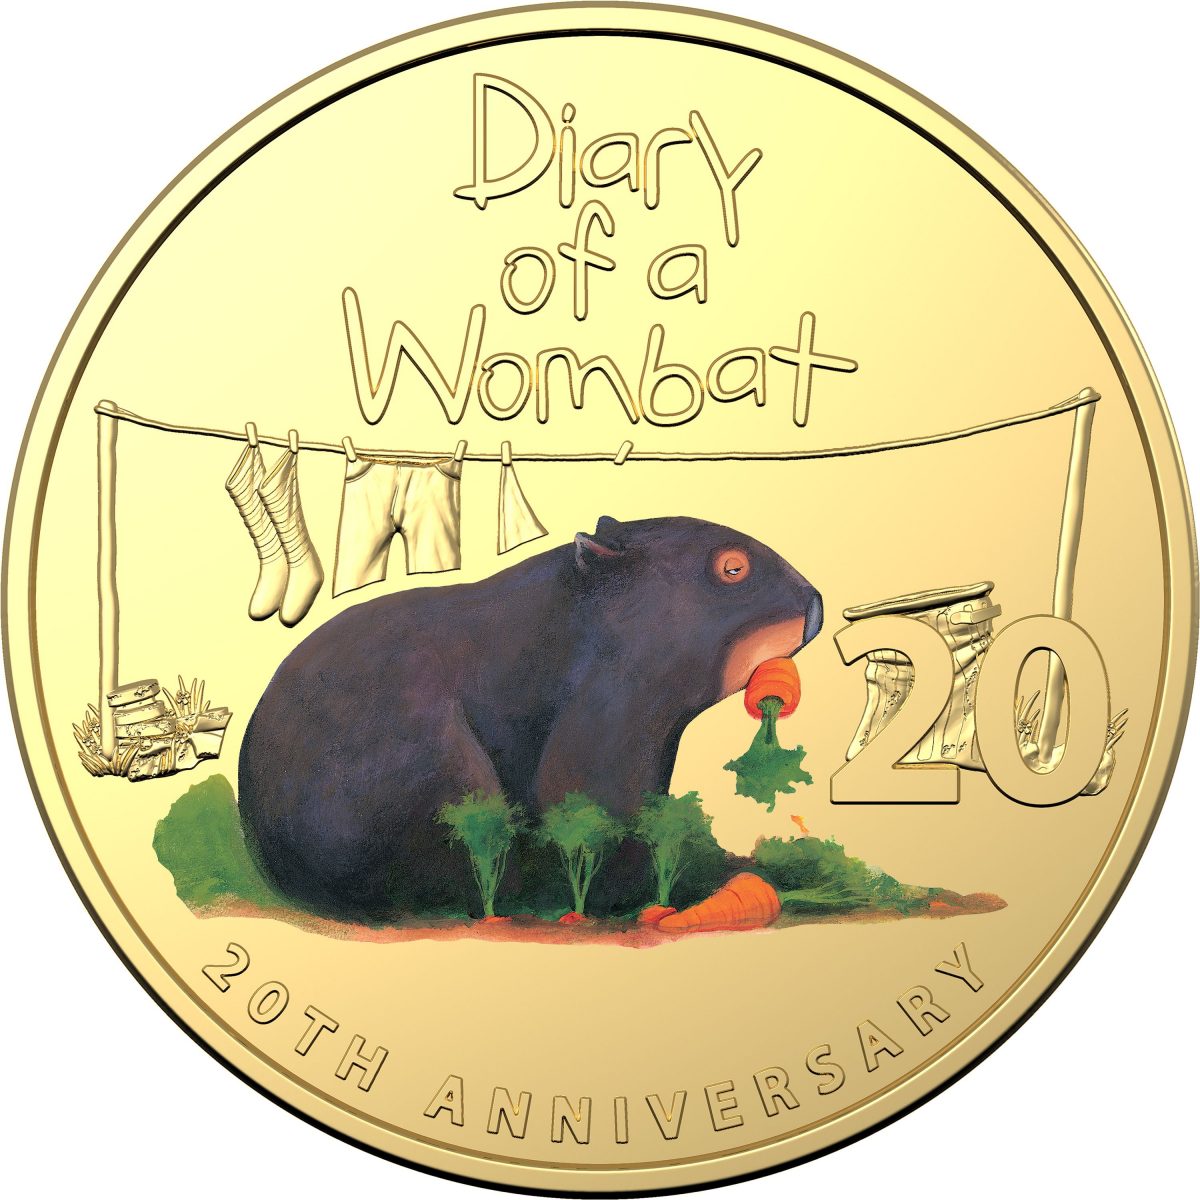 Wombat on coin